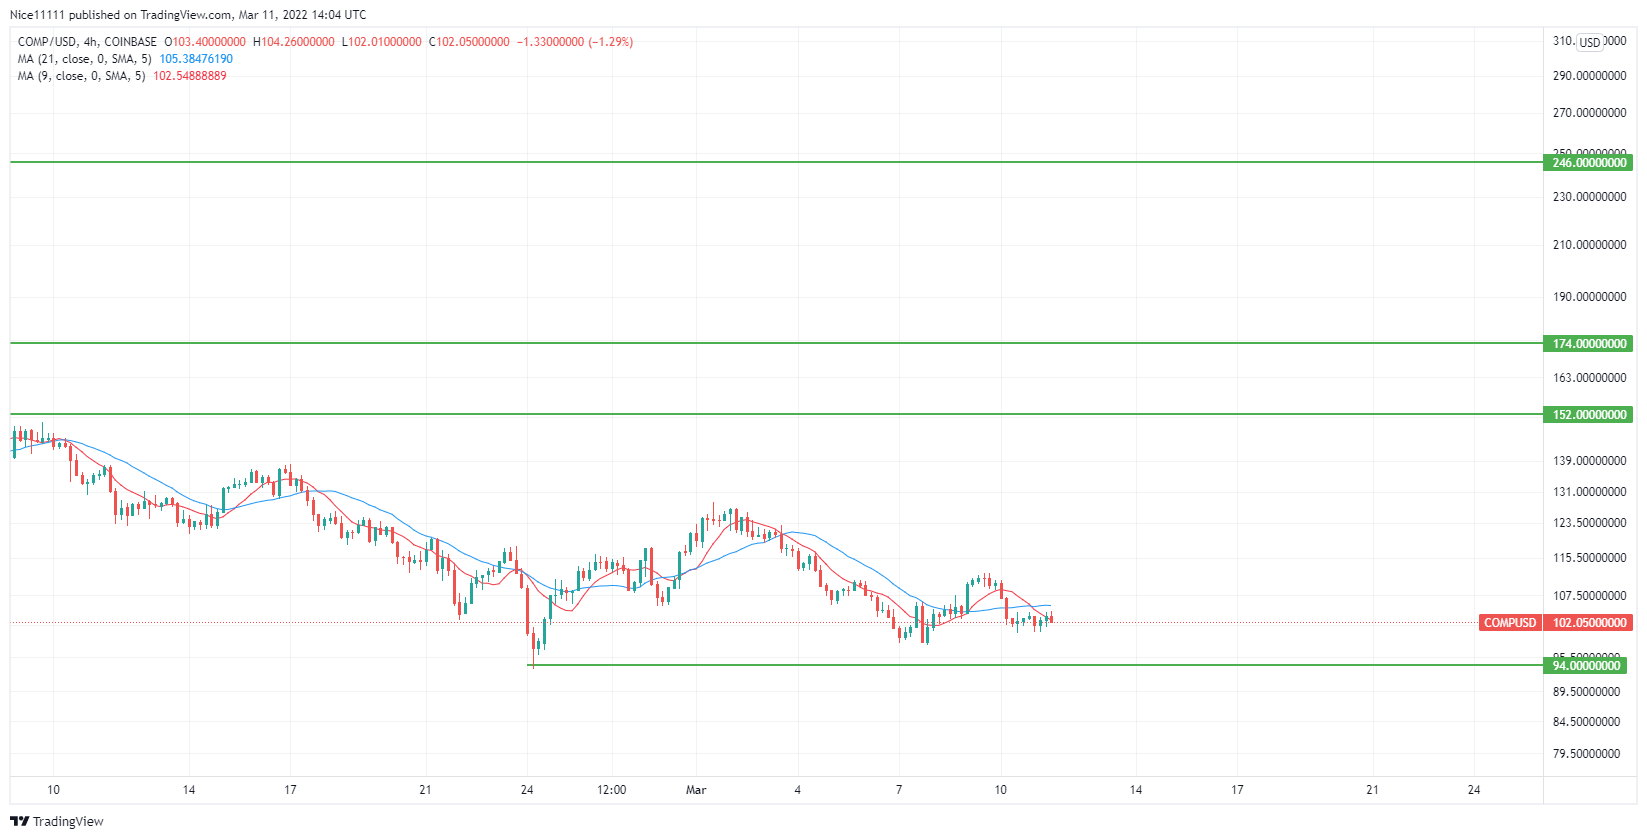 Compound (COMPUSD) Appears to Reach for a Major Zone After Rejection